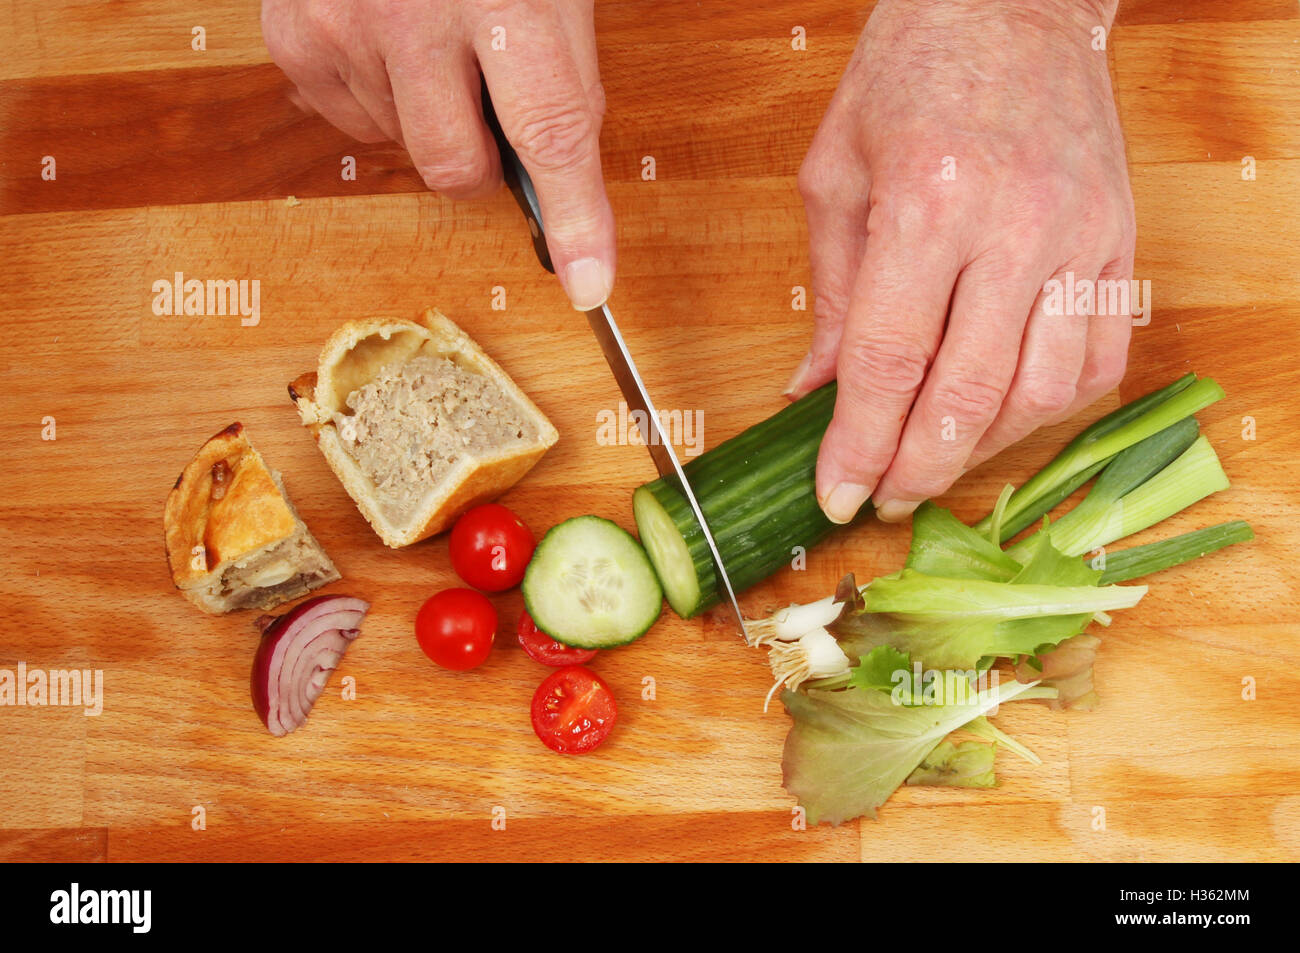 Hands preparing a salad on a wooden chopping board Stock Photo